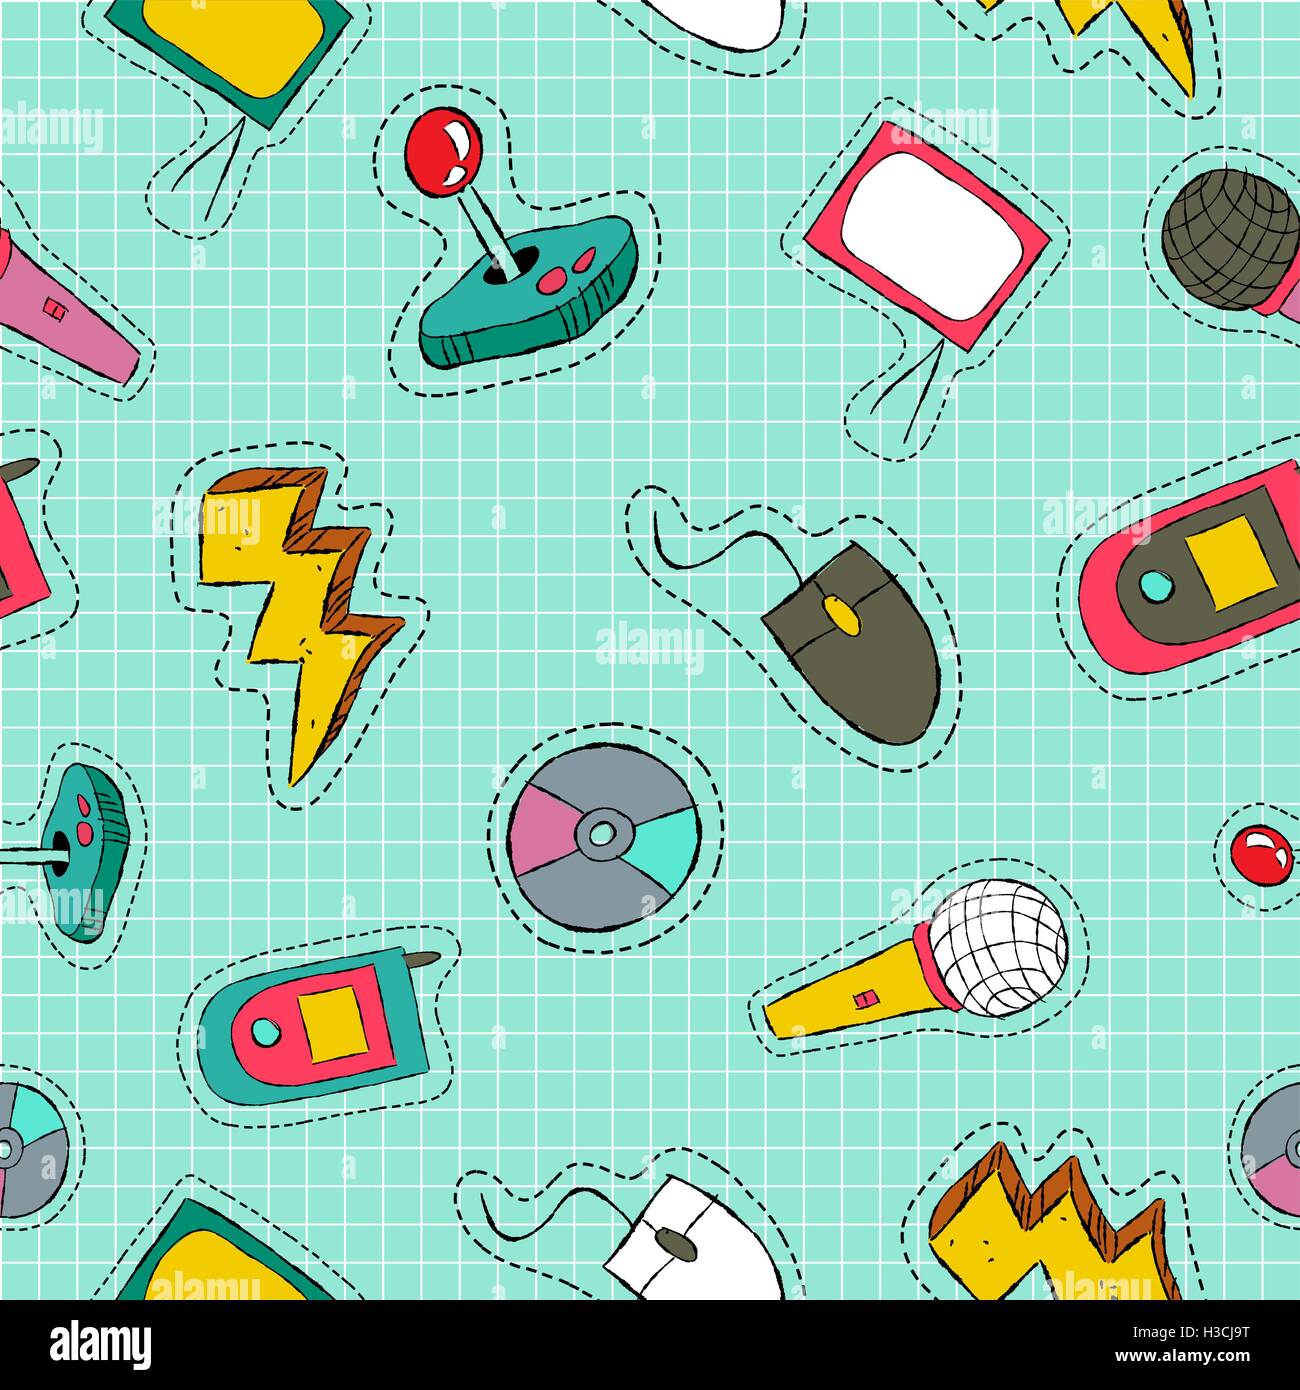 Retro style hand drawn seamless pattern with 80s and 90s video game technology patch icons. Mobile phone, music, TV and more. Stock Vector